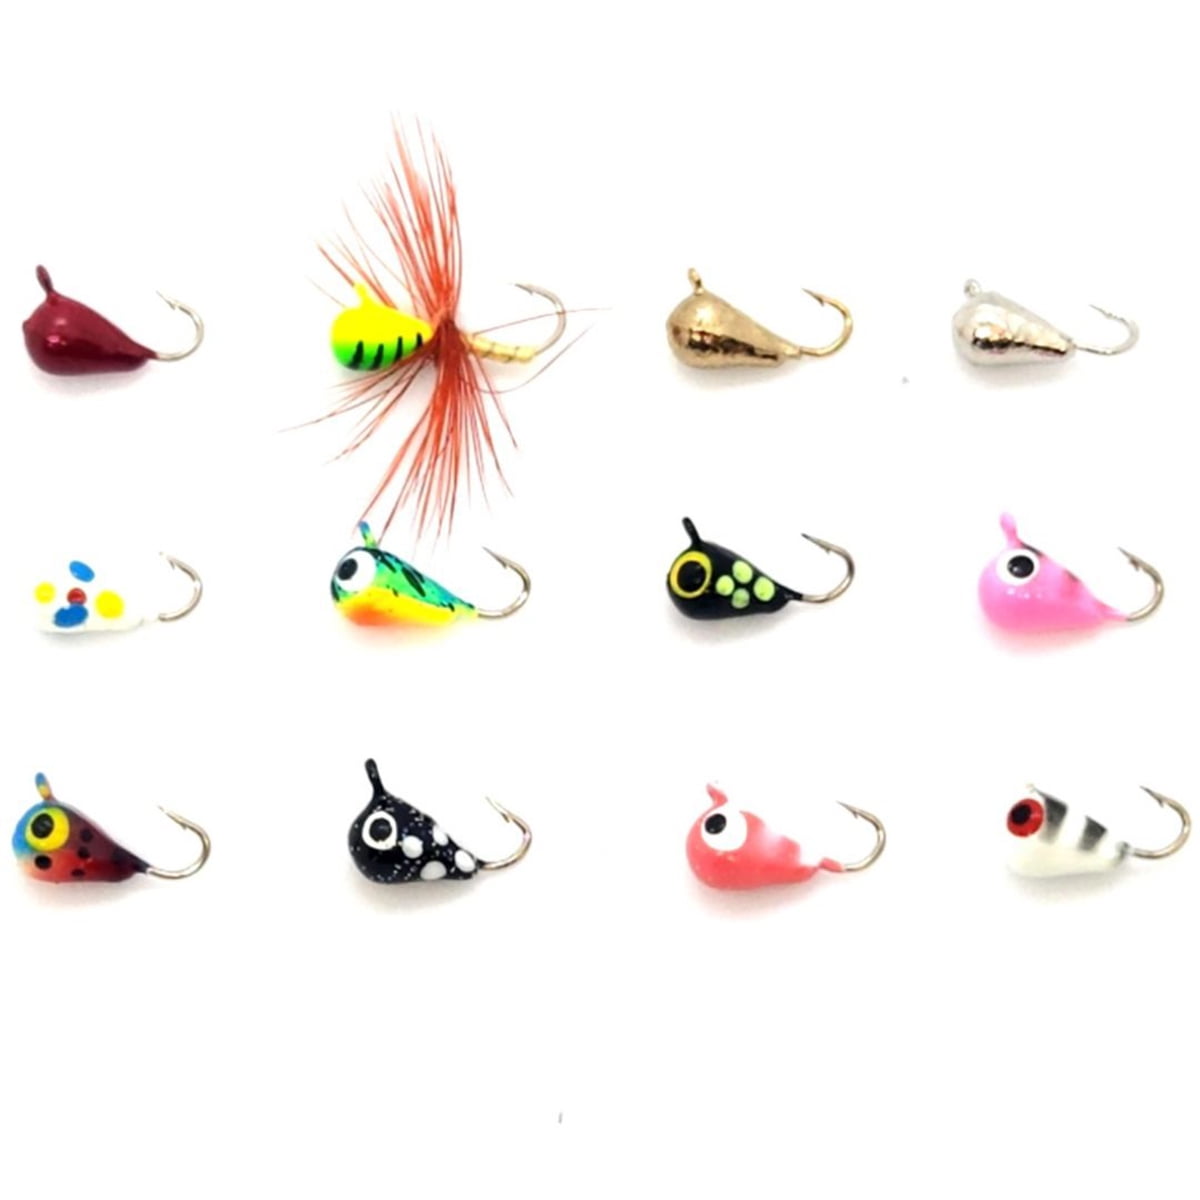 Vexan 12-Pack Tungsten Ice Fishing Jigs Glow & Multi-Color Free